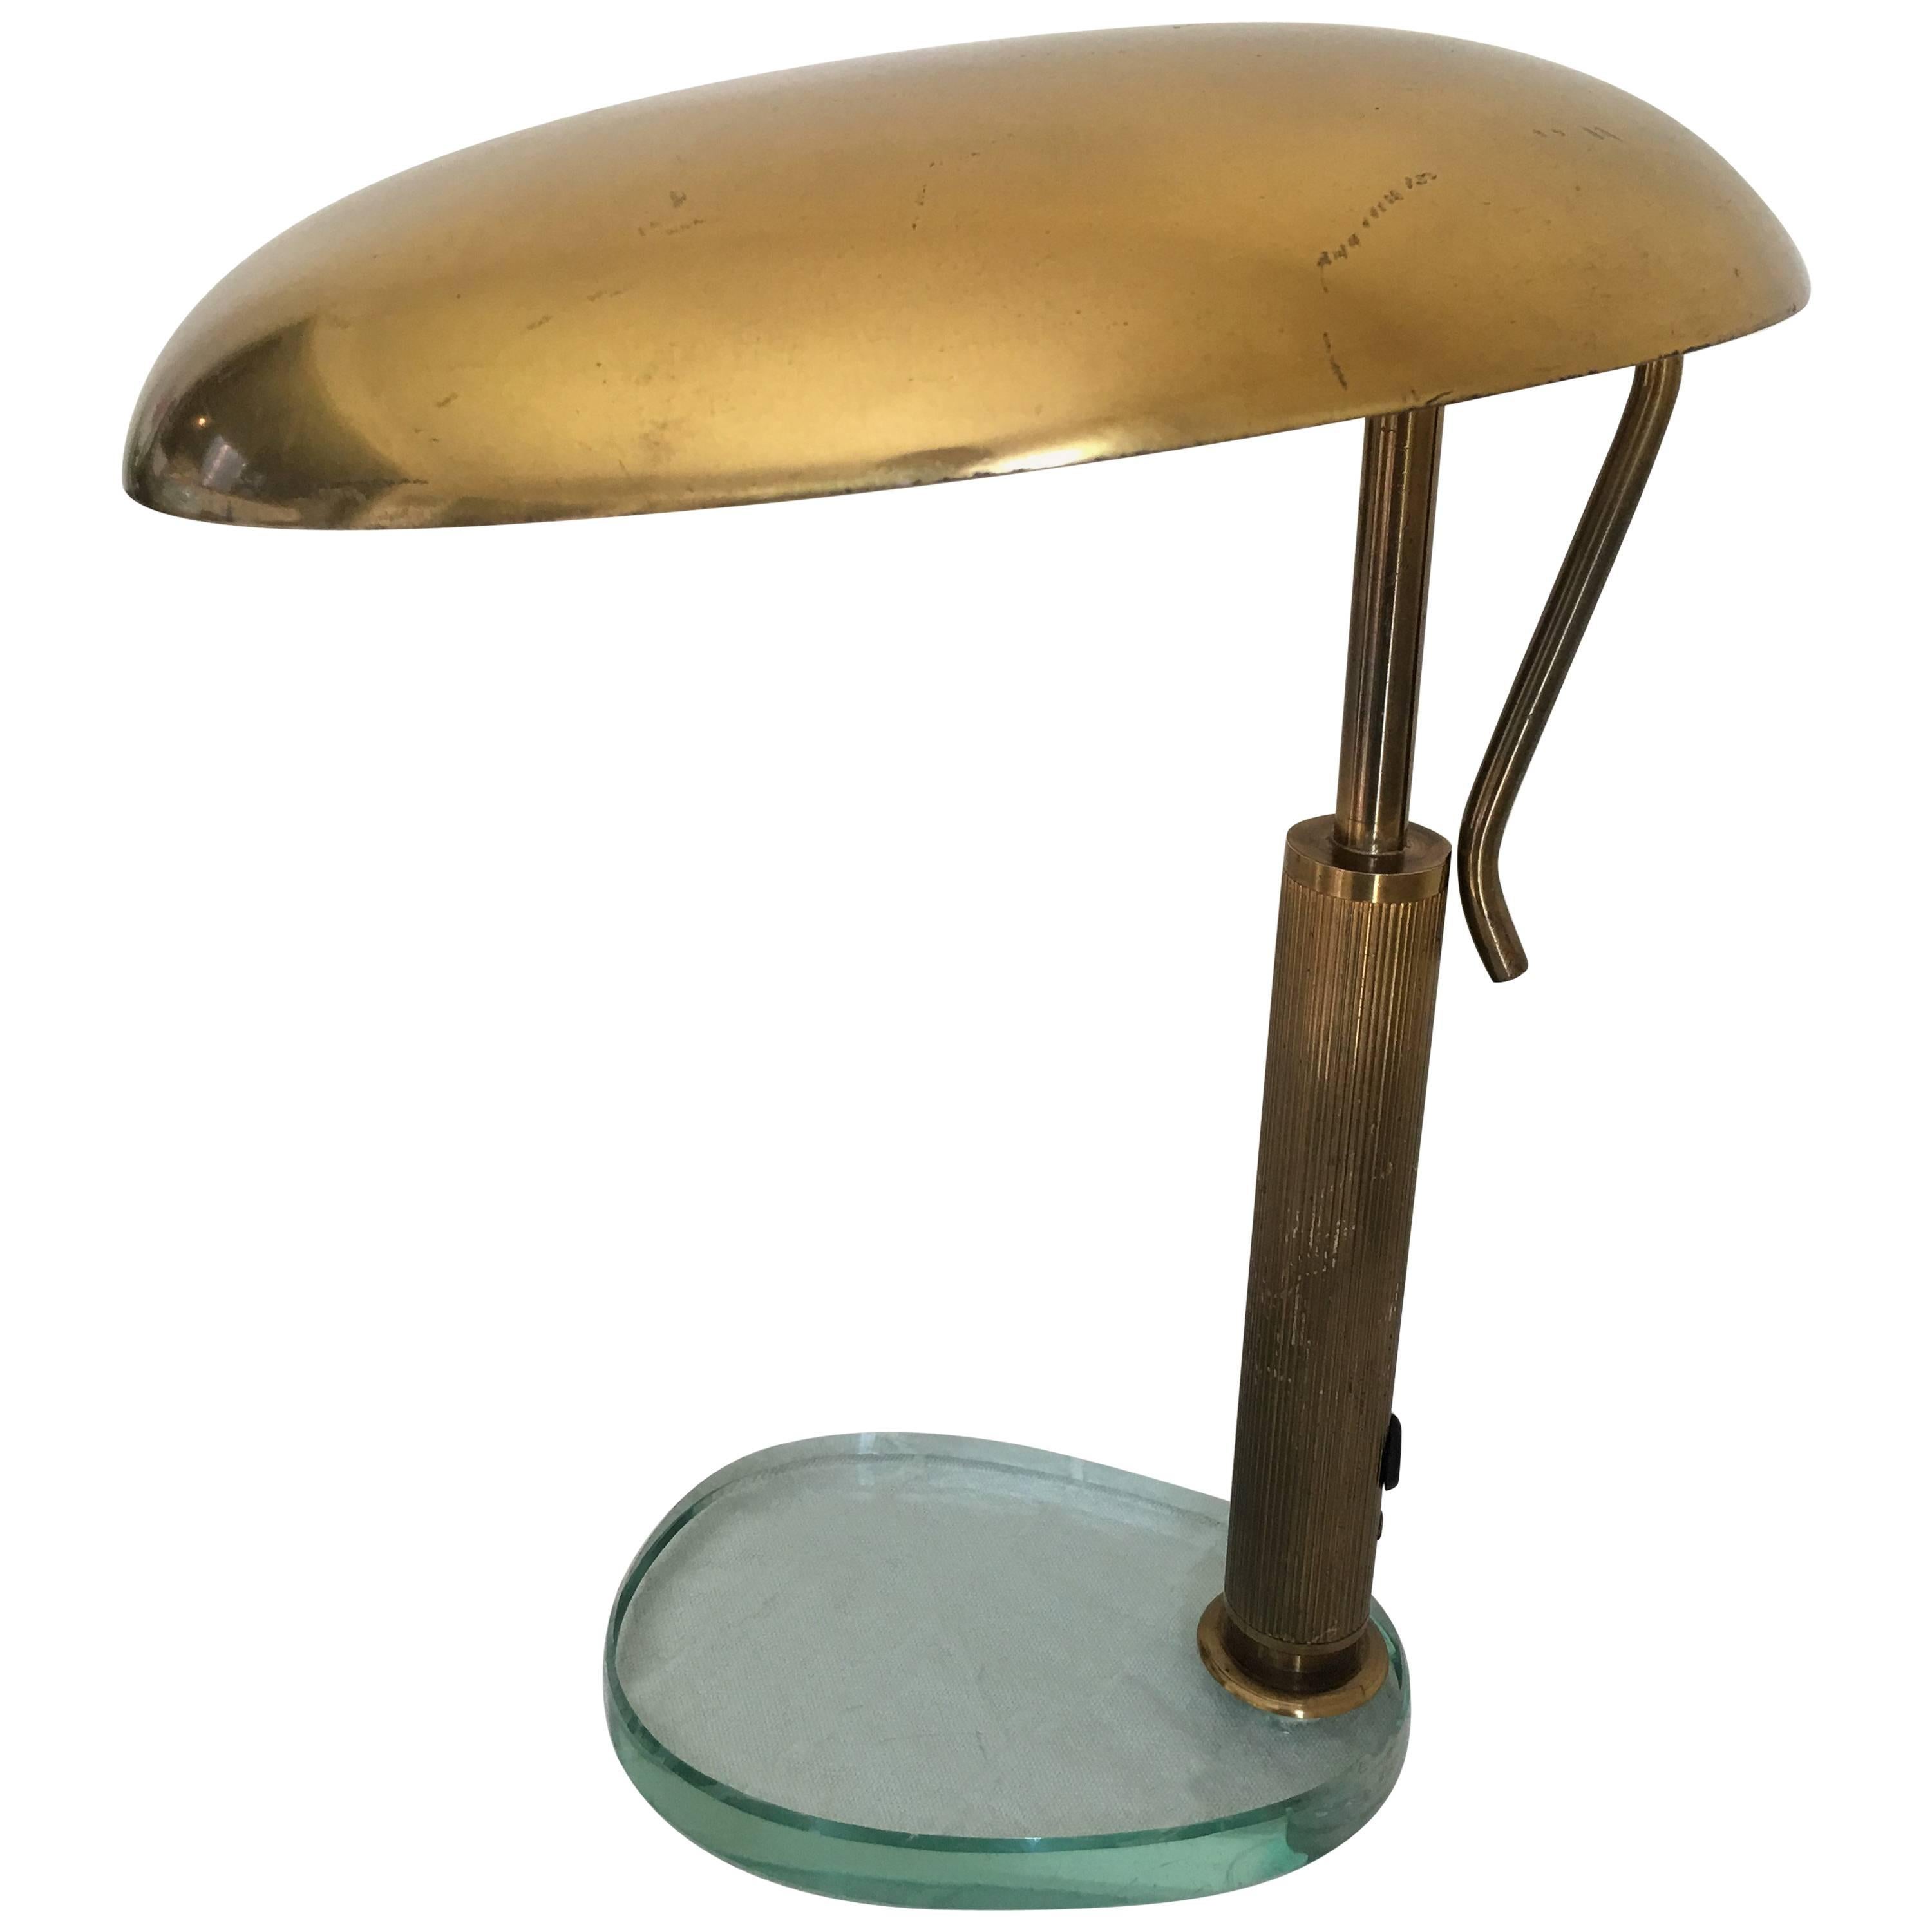 Fontana Arte 1950s Glass and Brass Desk Lamp with an Adjustable Reflector, Italy For Sale